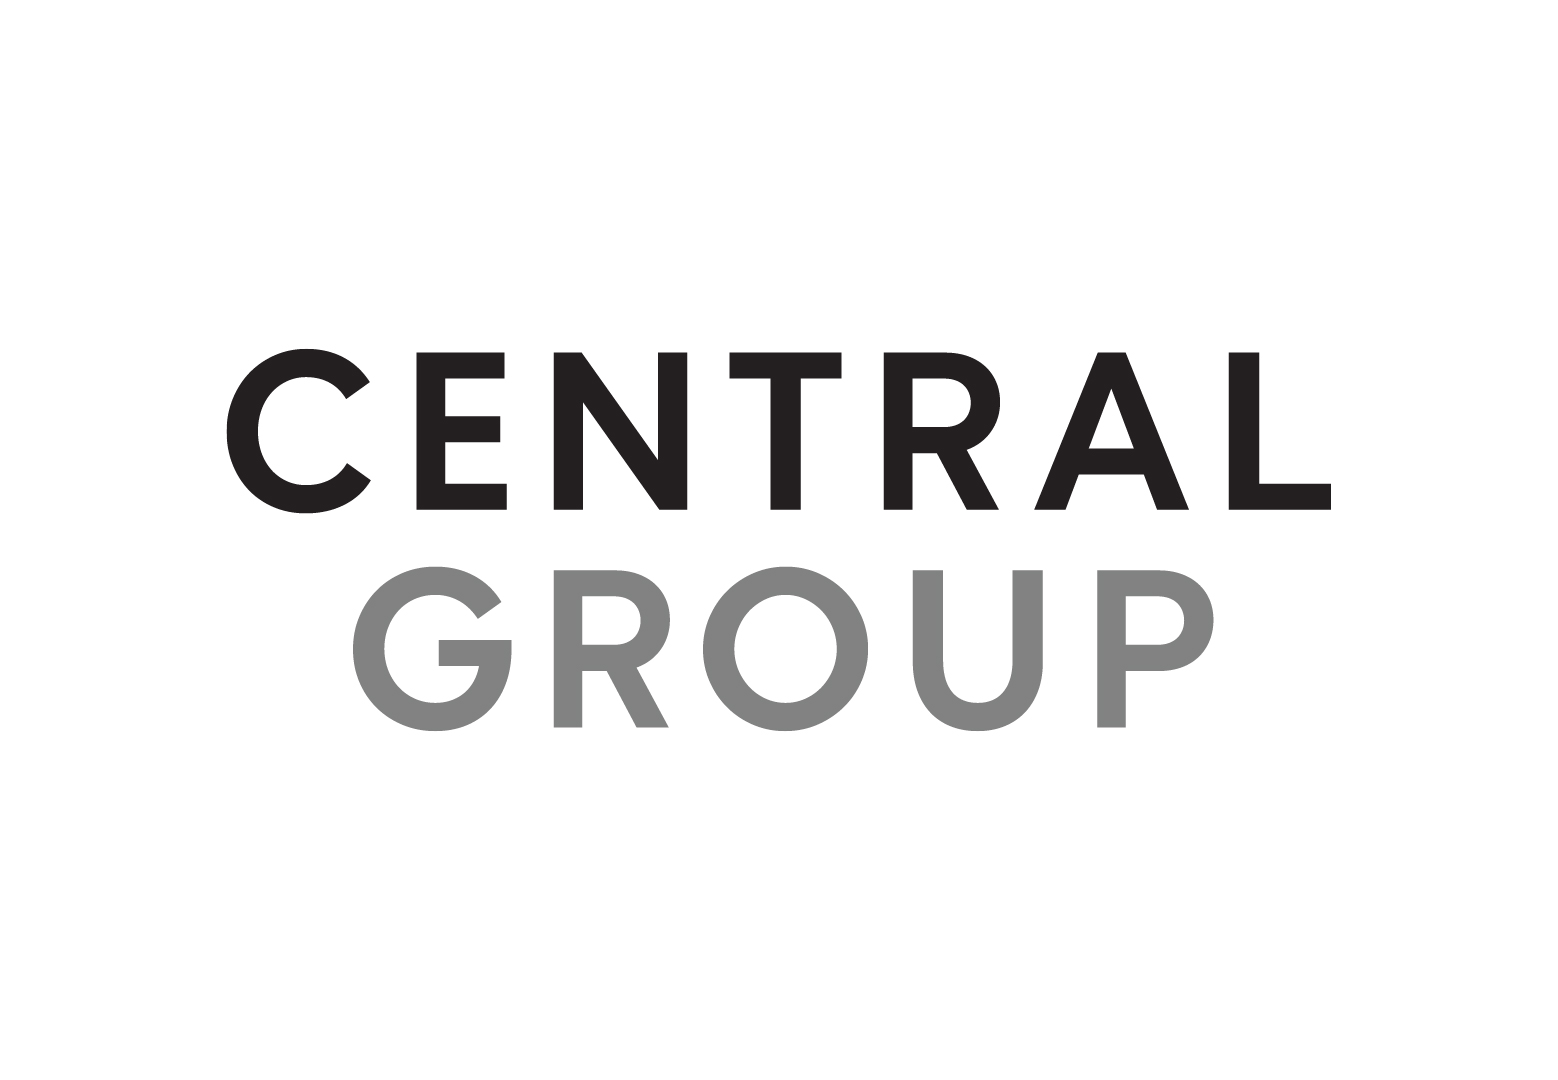 Central group